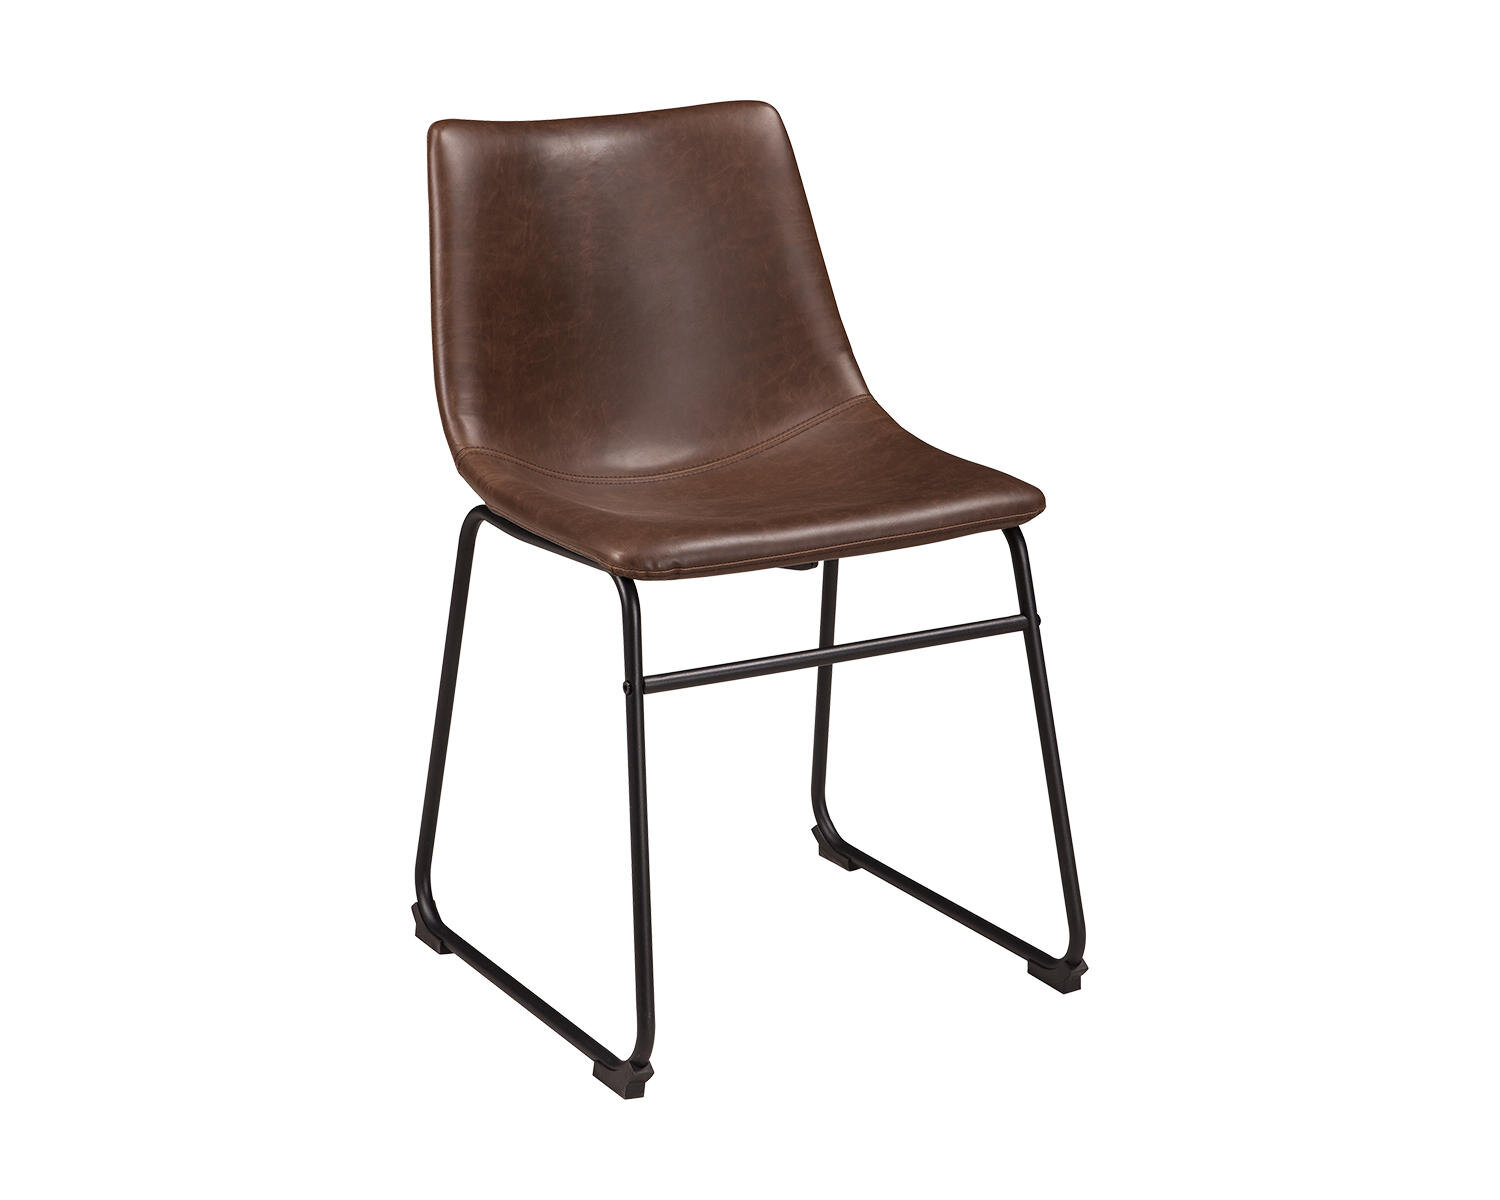 Bolero Faux Leather Dining Chairs in Antique Brown Height 510mm Pack of 2 